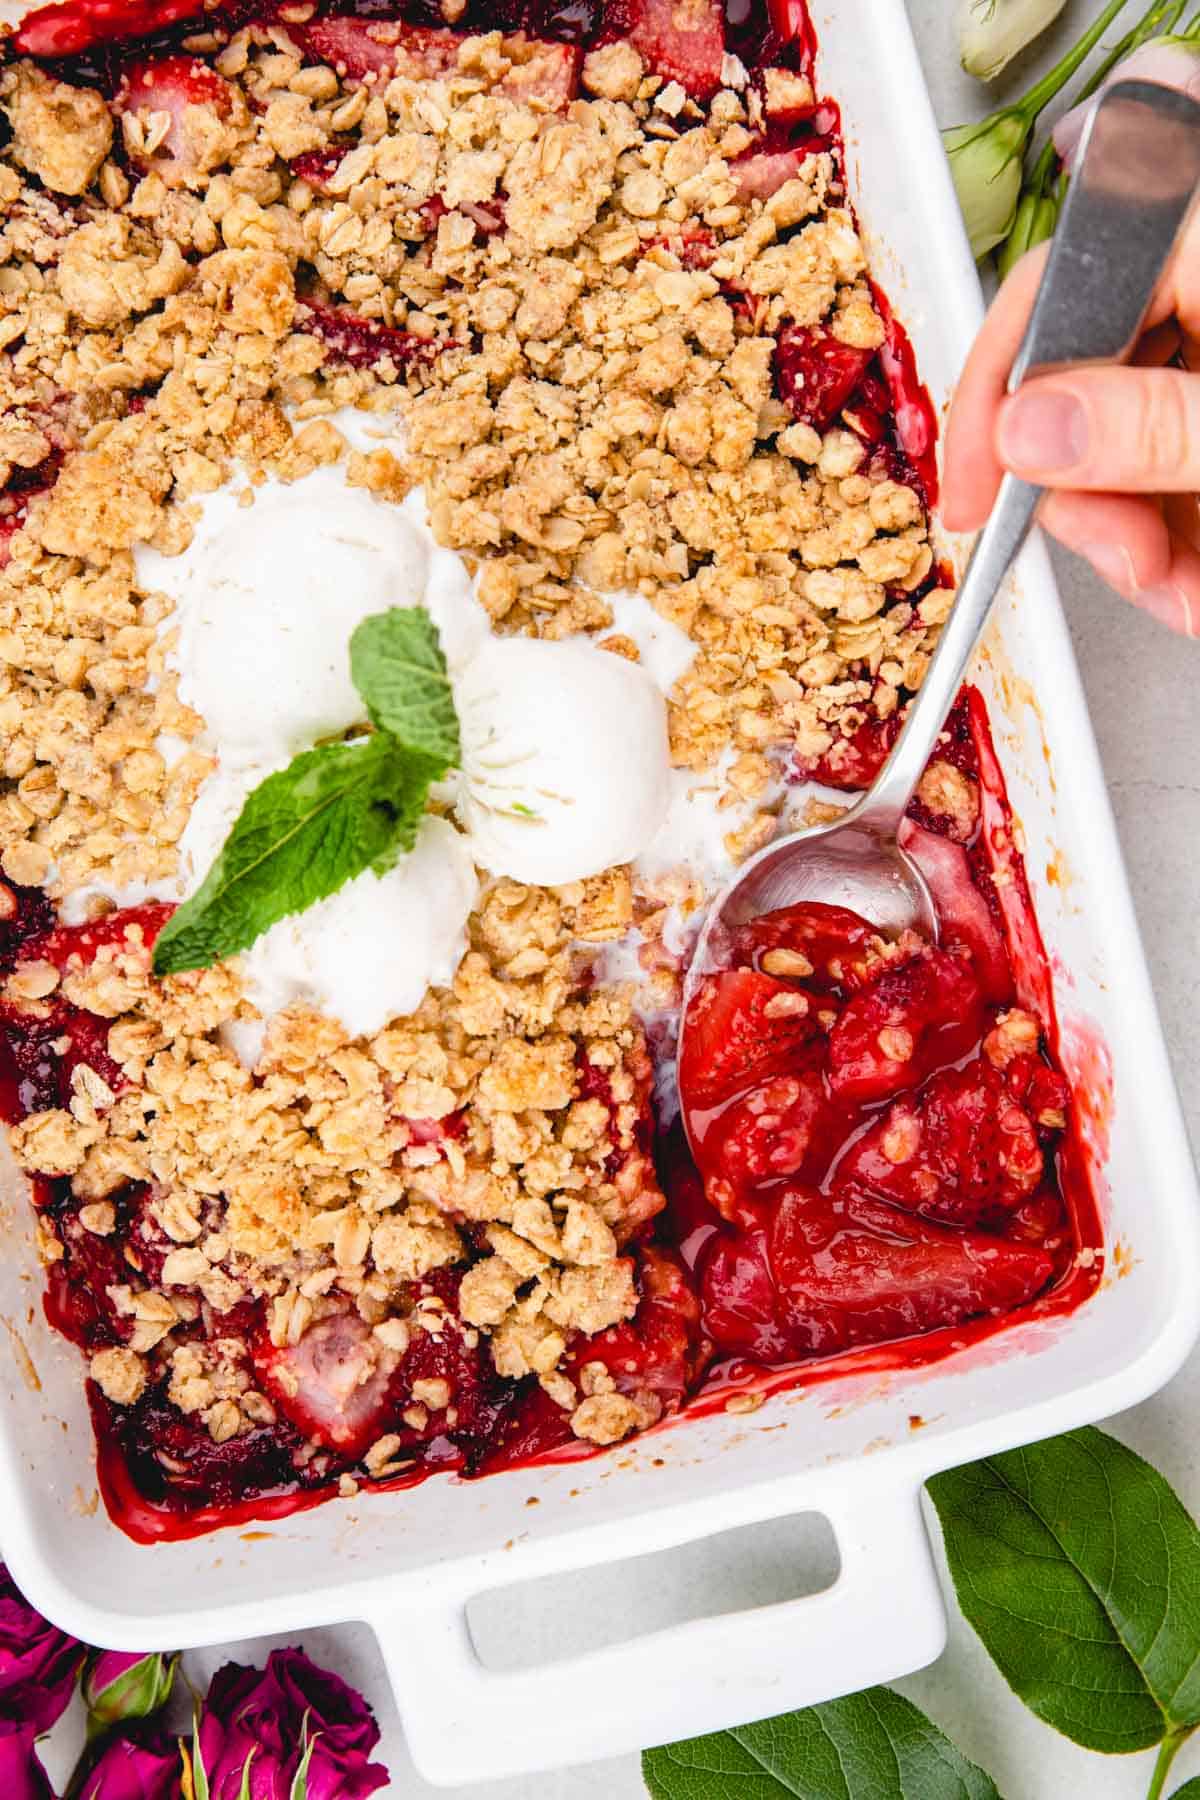 Scooping out strawberry crumble with a spoon, topped with ice cream and mint leaves.